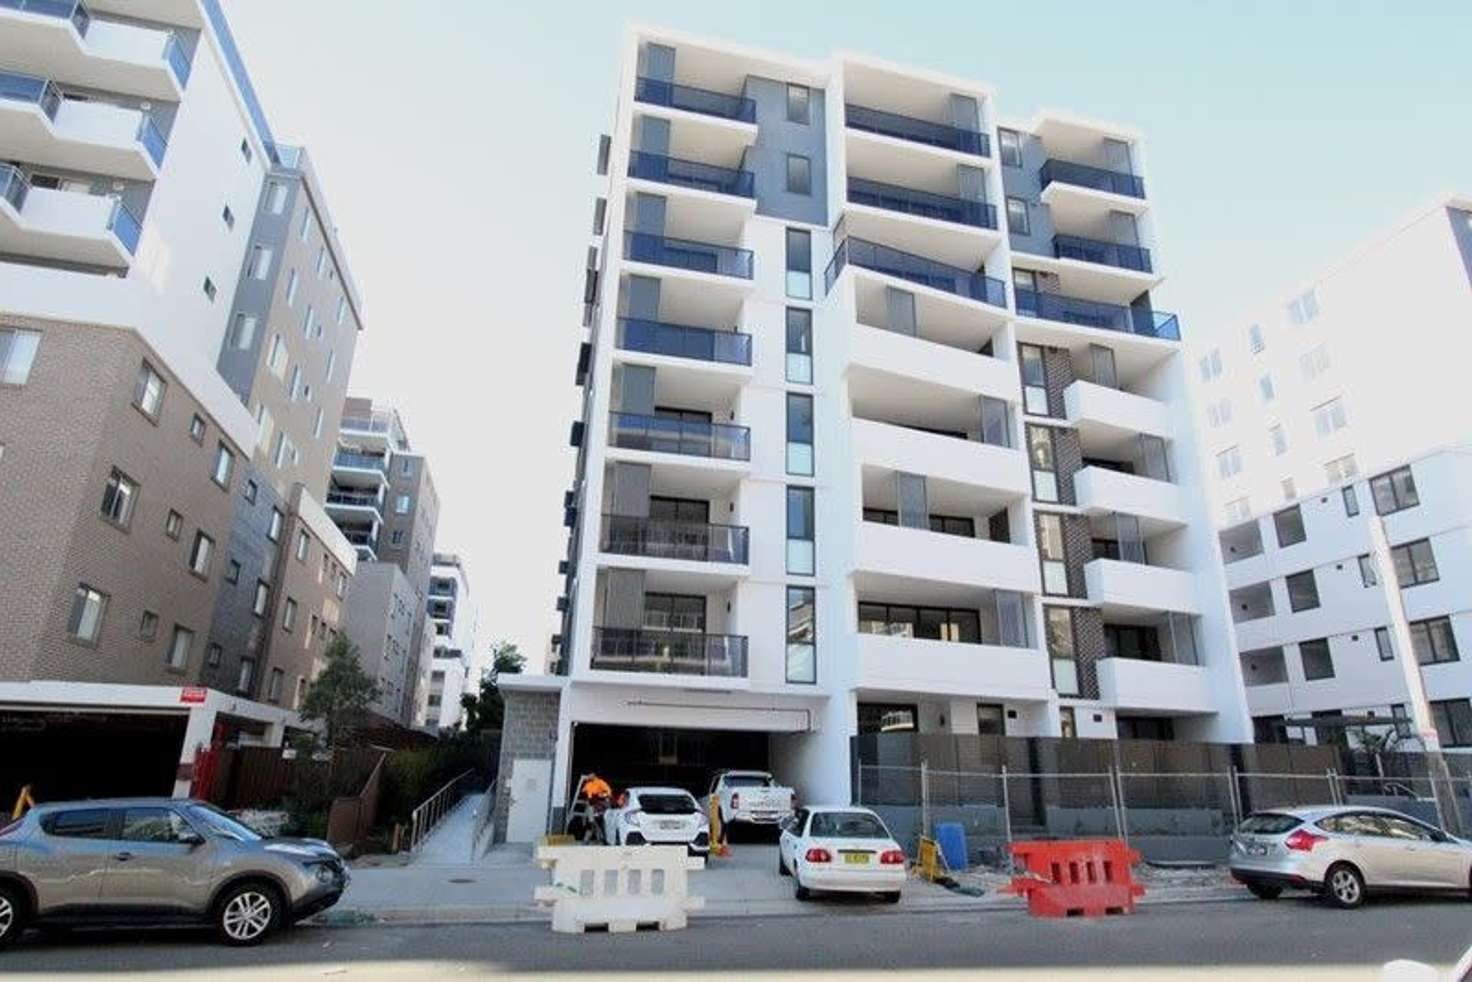 Main view of Homely apartment listing, 59/6-8 George Street, Liverpool NSW 2170